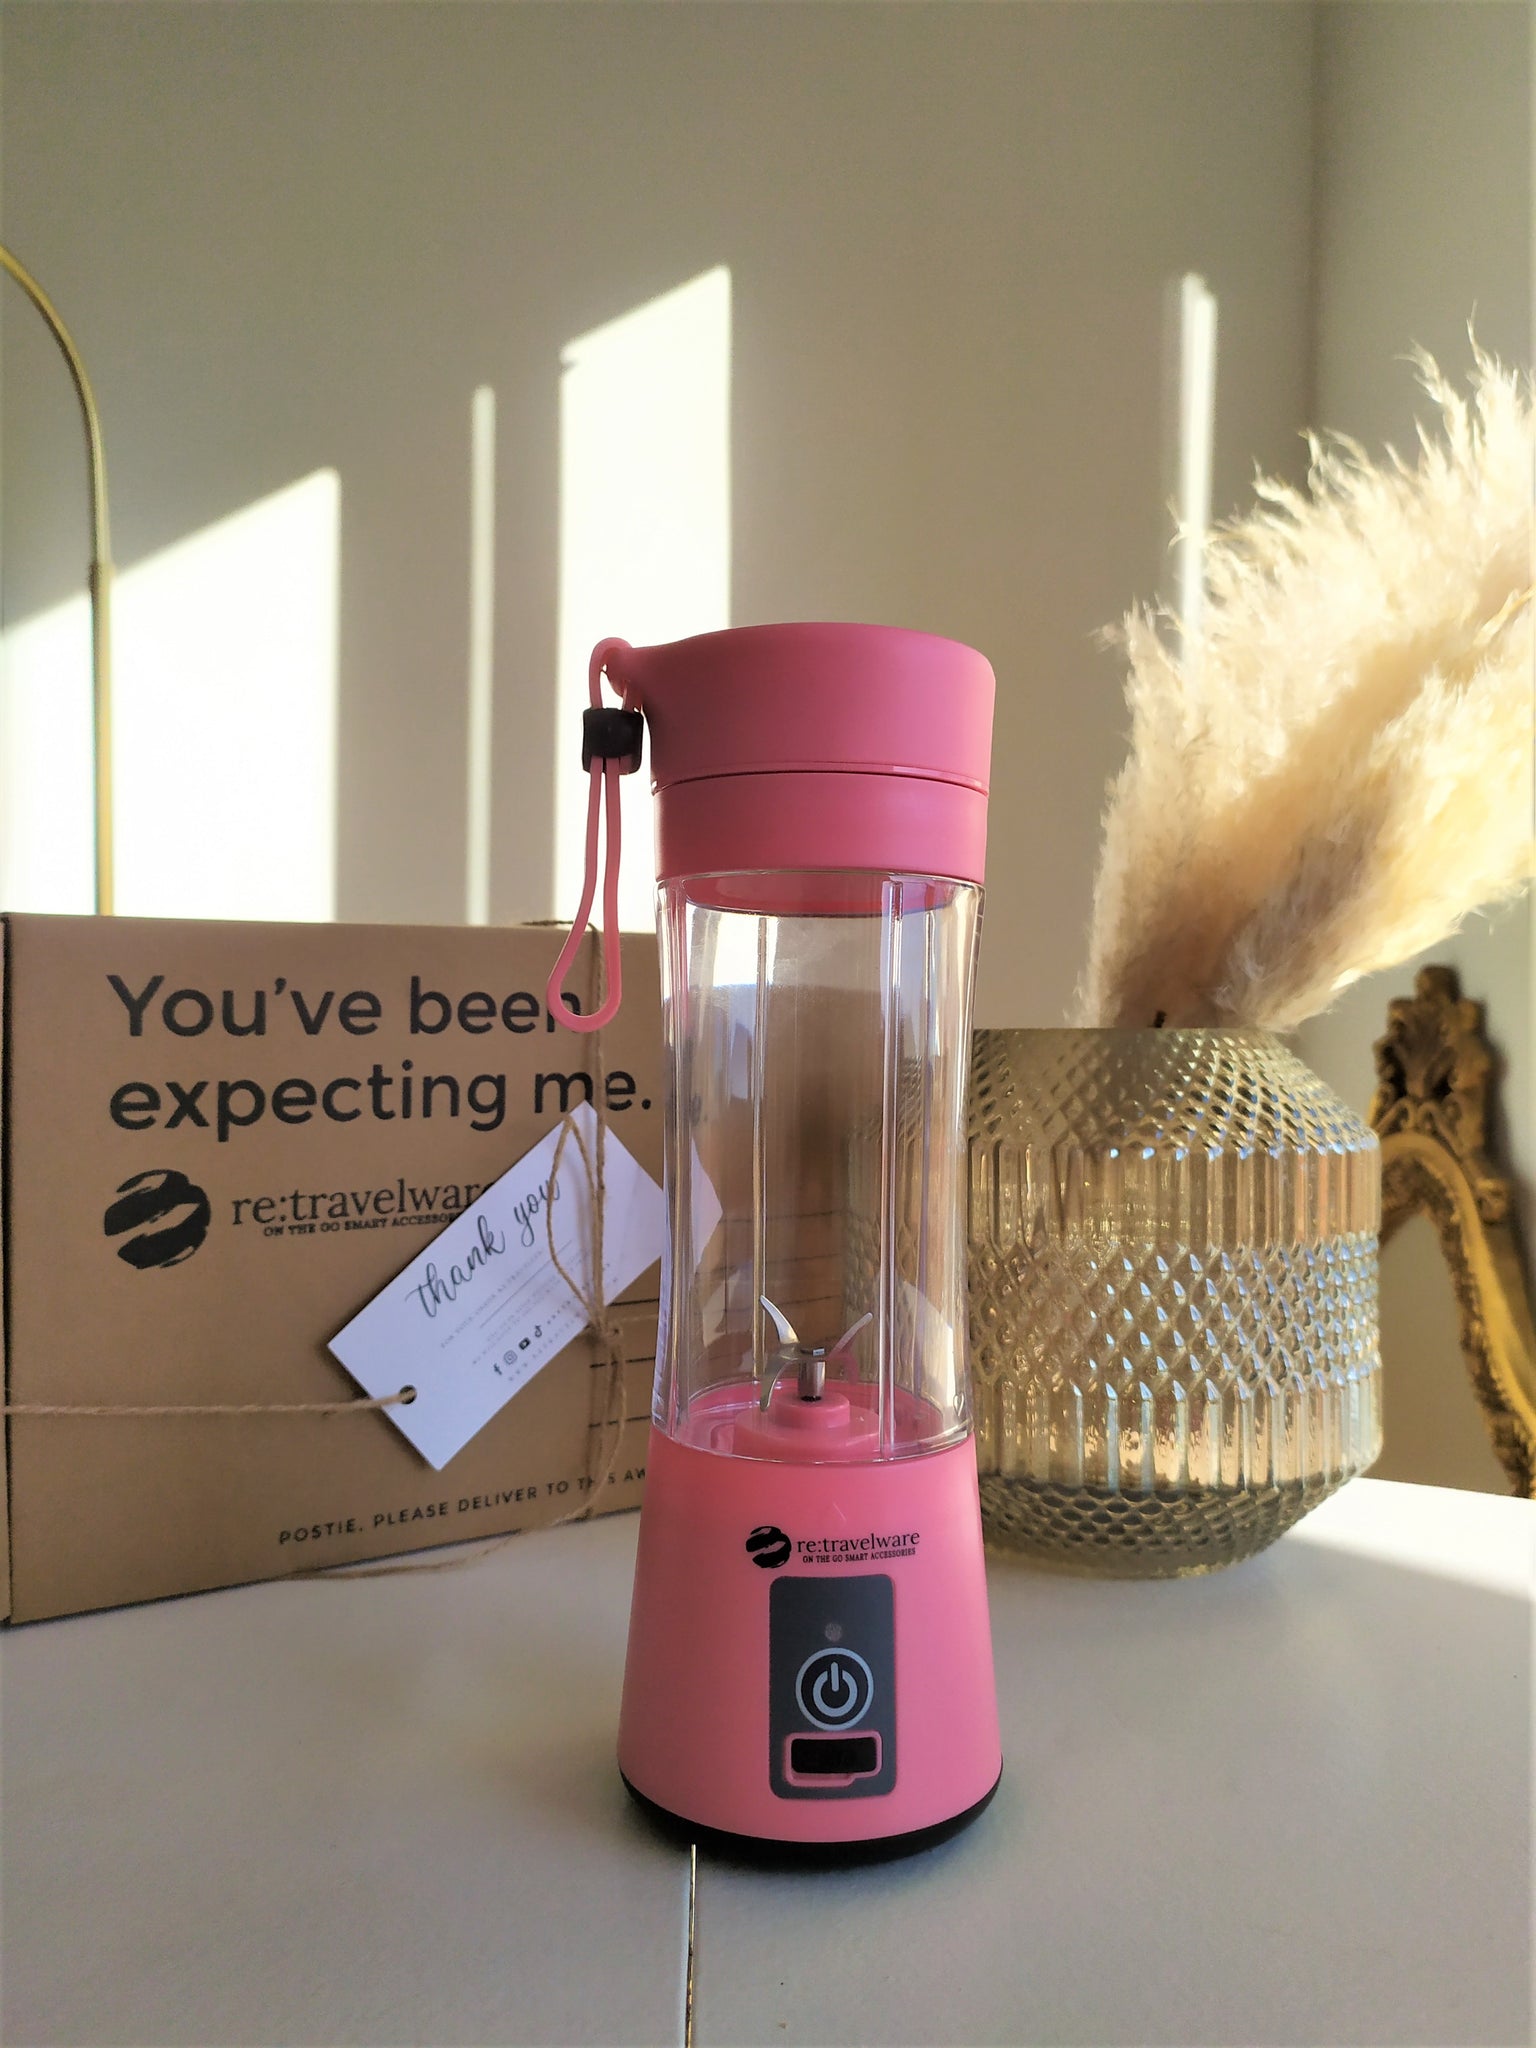 A portable Blender for the Traveler in you